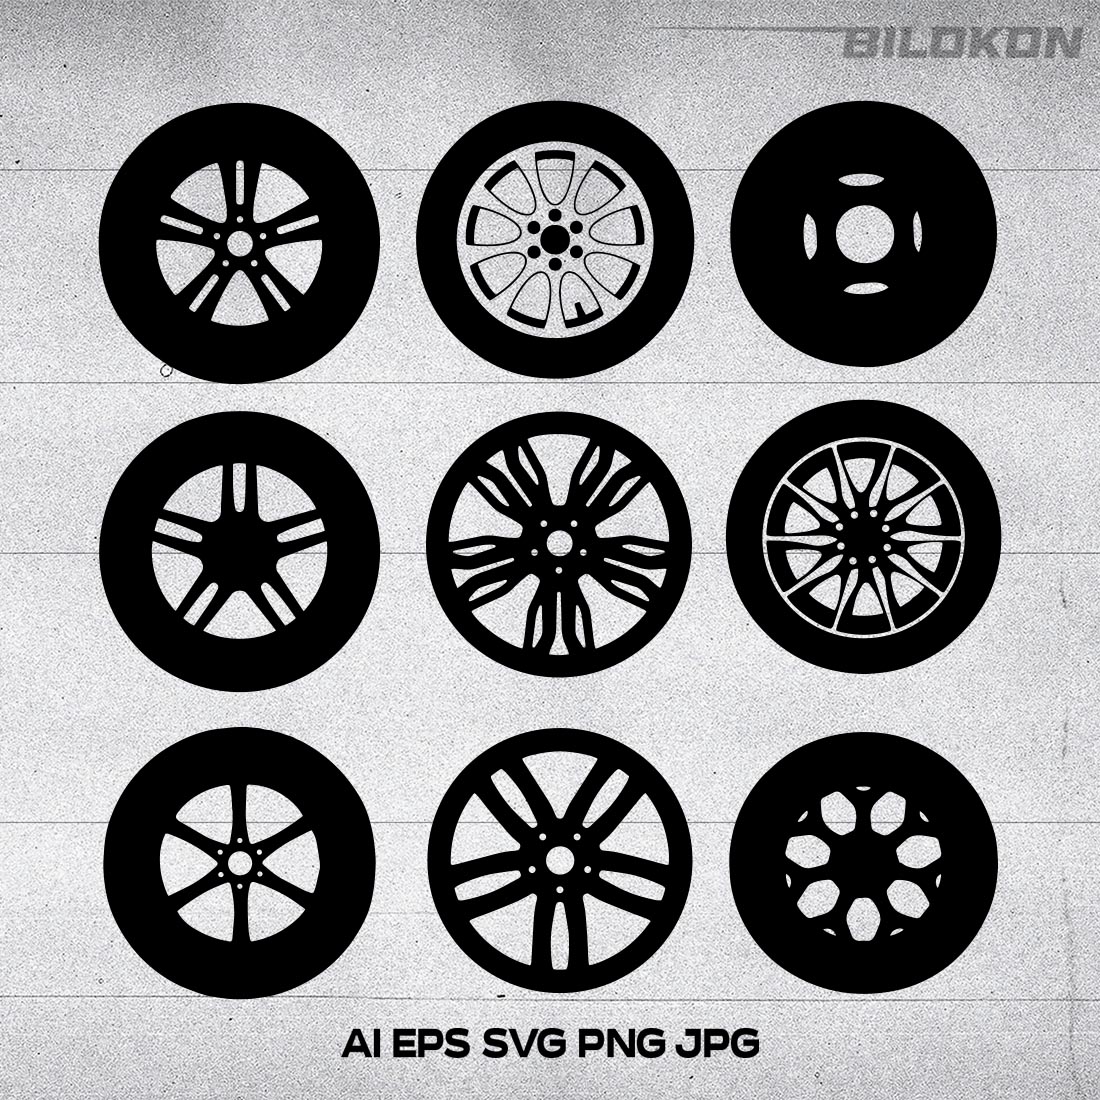 Set of Car Tires, Tyre Fitting Service Advertising Poster, SVG Vector main cover.